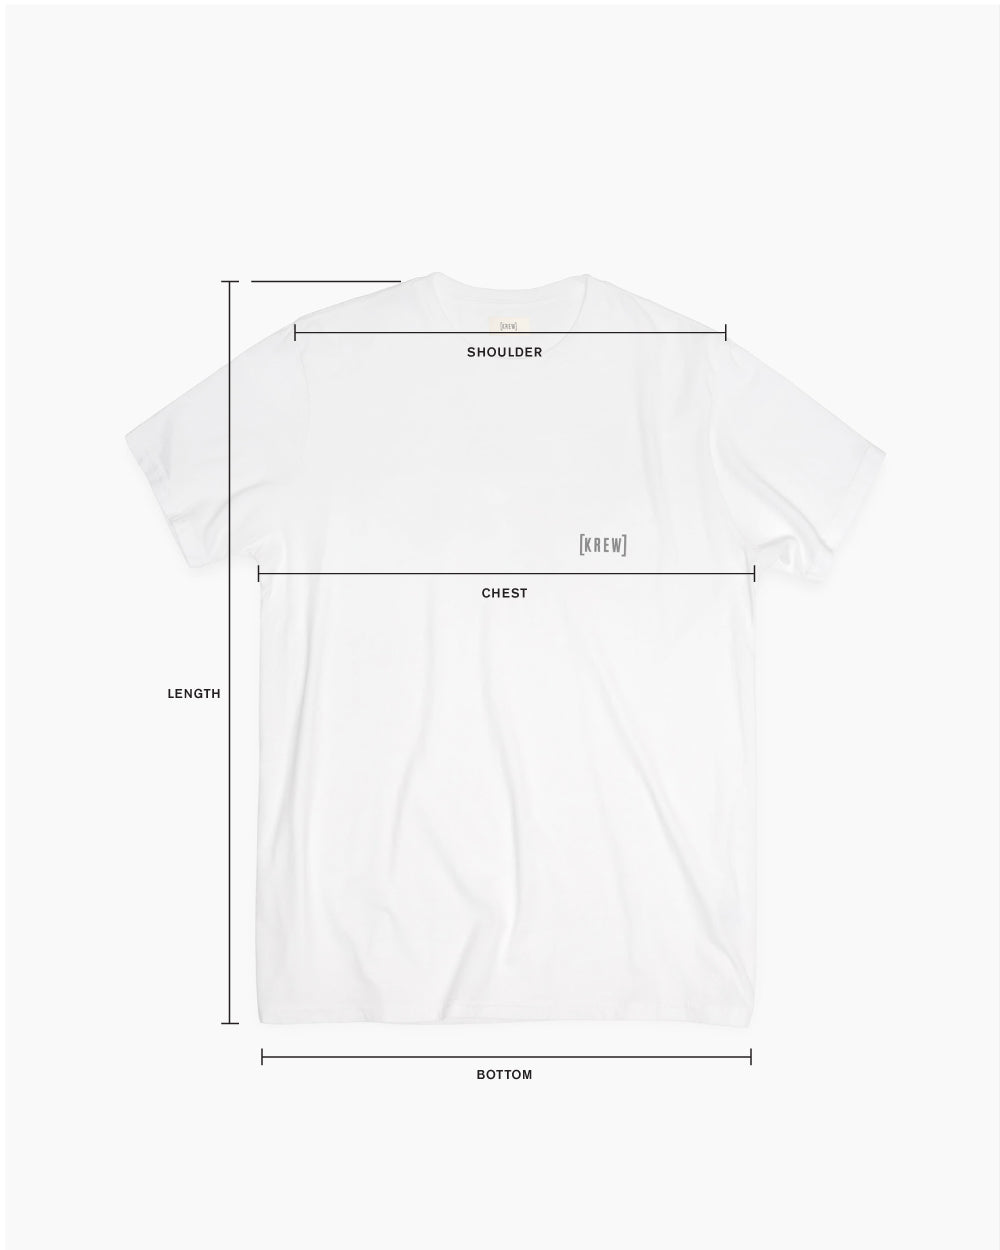 T-SHIRT SIZE GUIDE